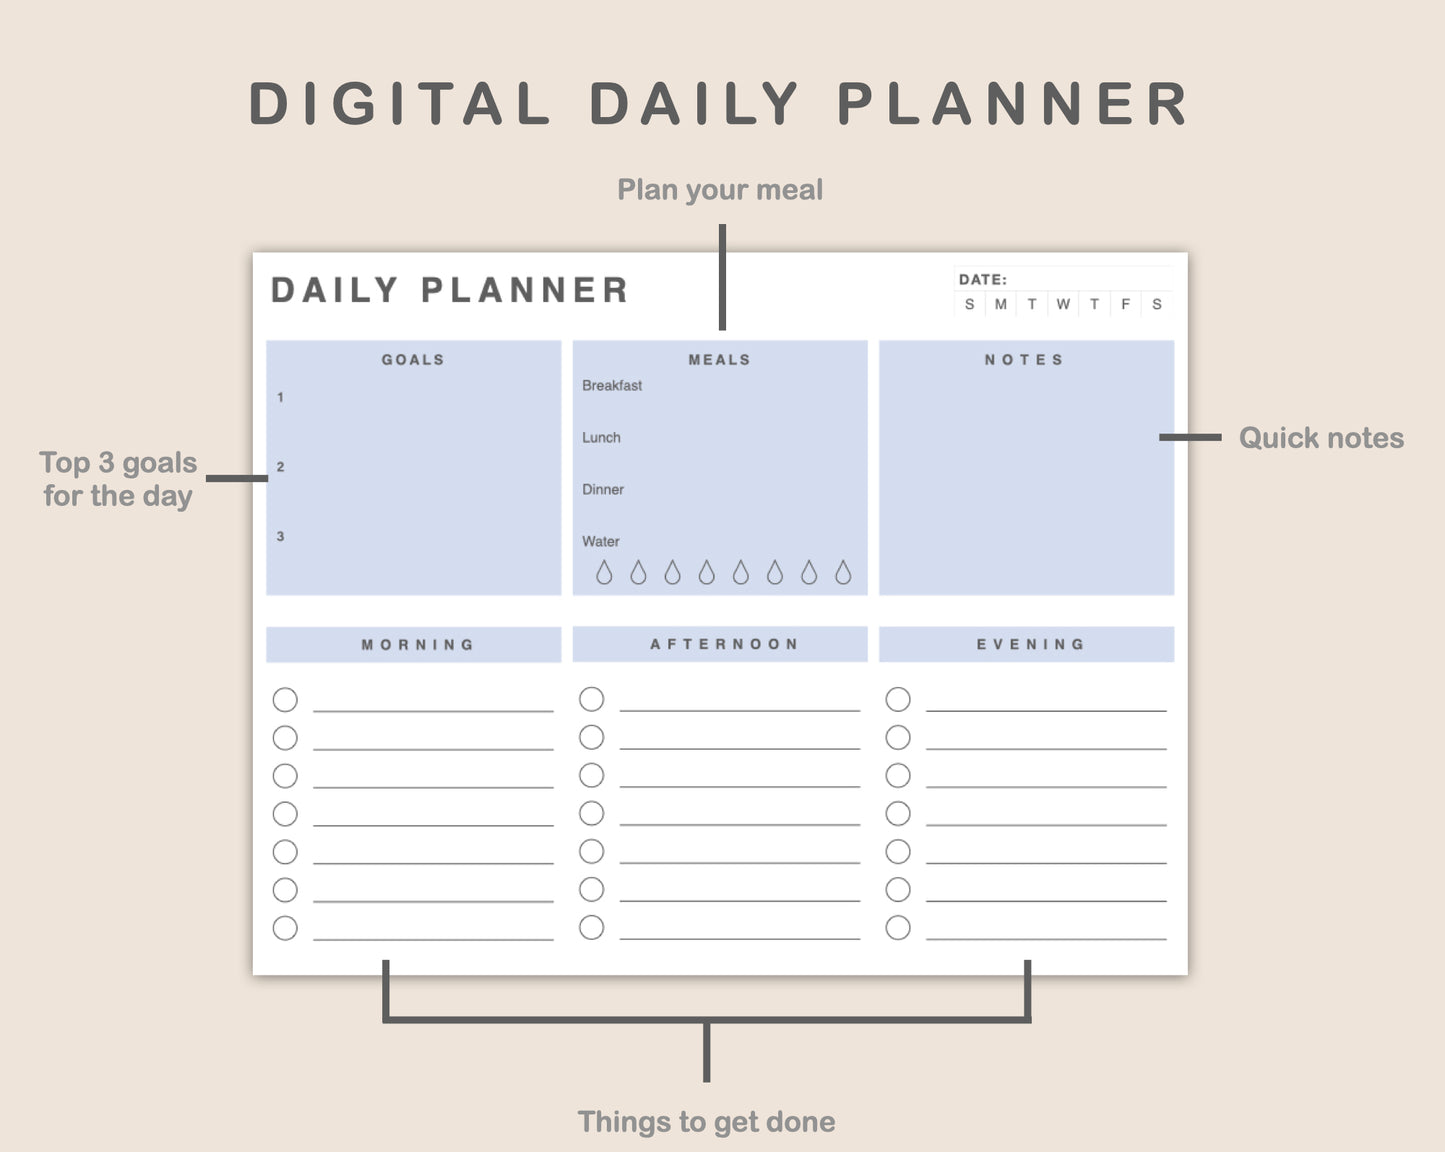 Daily Planner, To Do List - Landscape